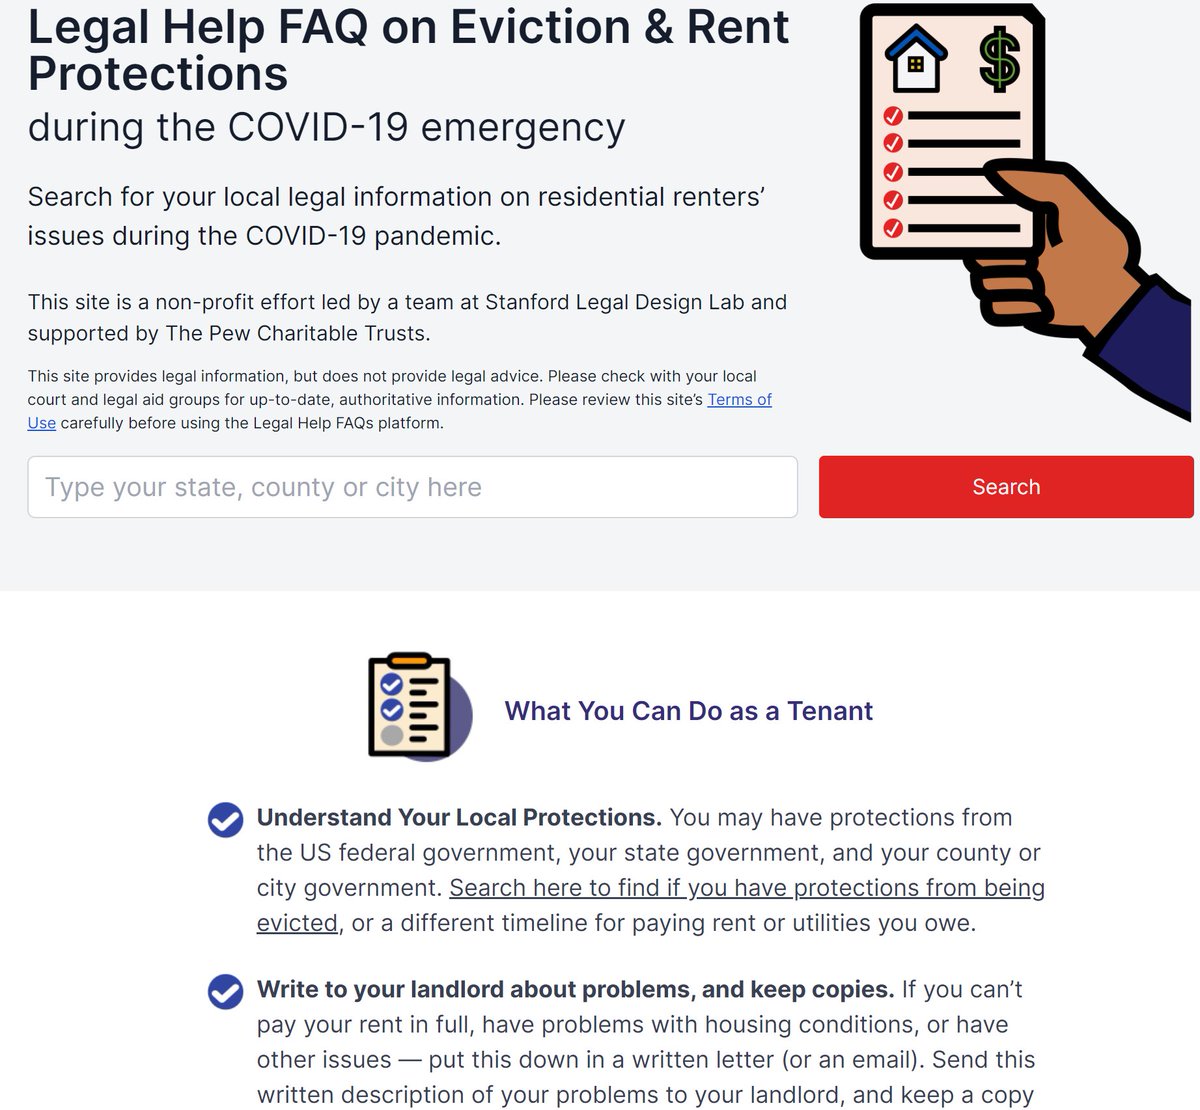  @LegalDesignLab has launched a new website for  #tenants &  #landlords seeking info local to their community:  http://legalfaq.org . Site solves problem of surfacing info that is local to the user's community.  #CGVirtualSummit  @leagueofcities